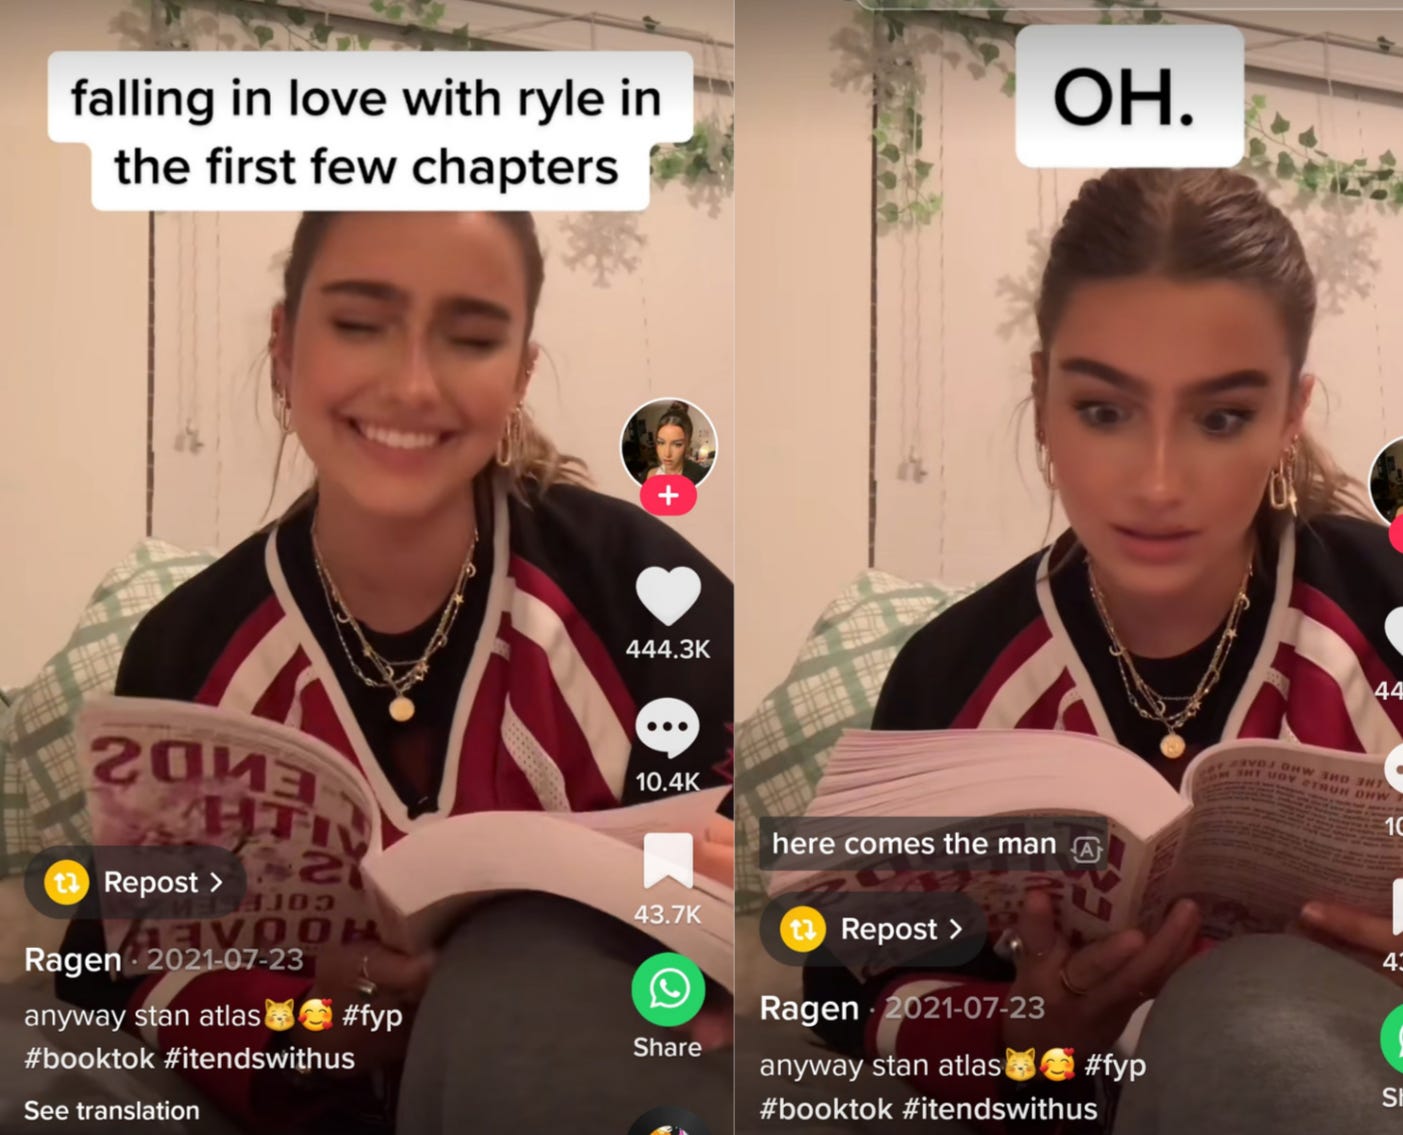 TikTok user smiling under text that says "falling in love with Ryle in the first few chapters." In the next image, the same TikToker has read further into the book. The caption says "Oh" as they look at the book, shocked. 